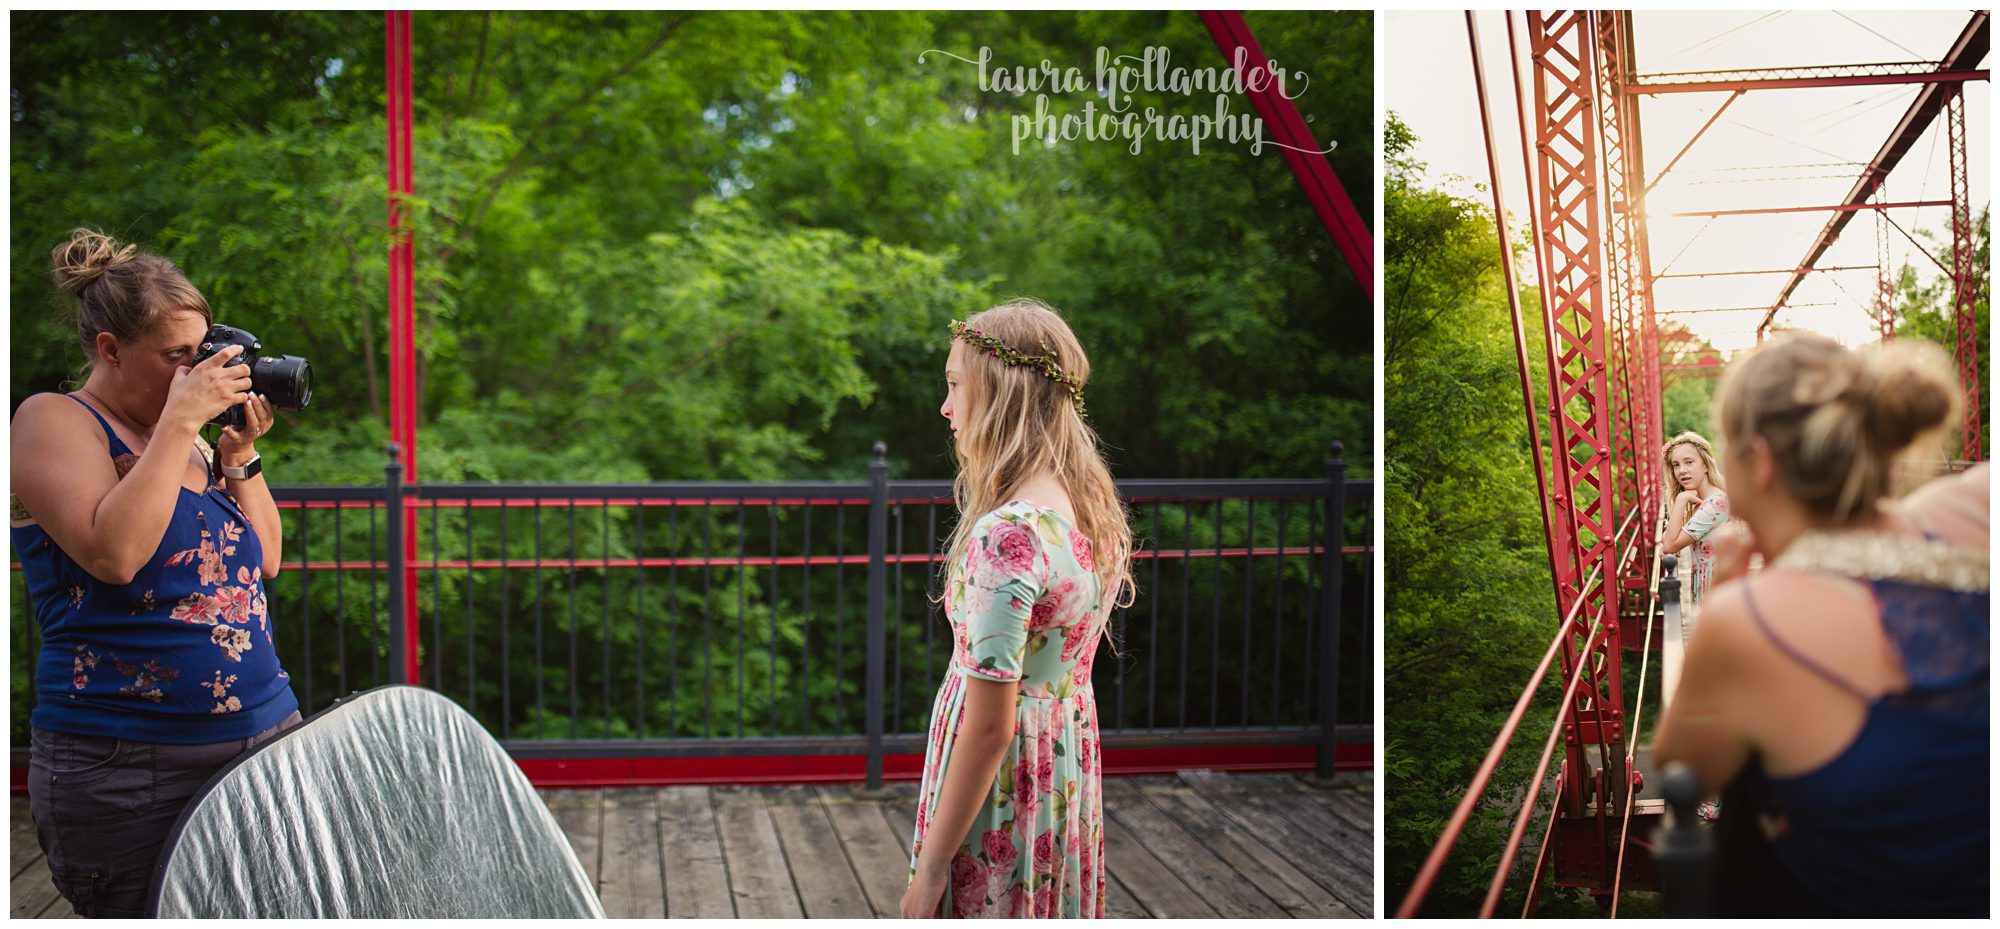 behind the scenes with lacey dippold photography